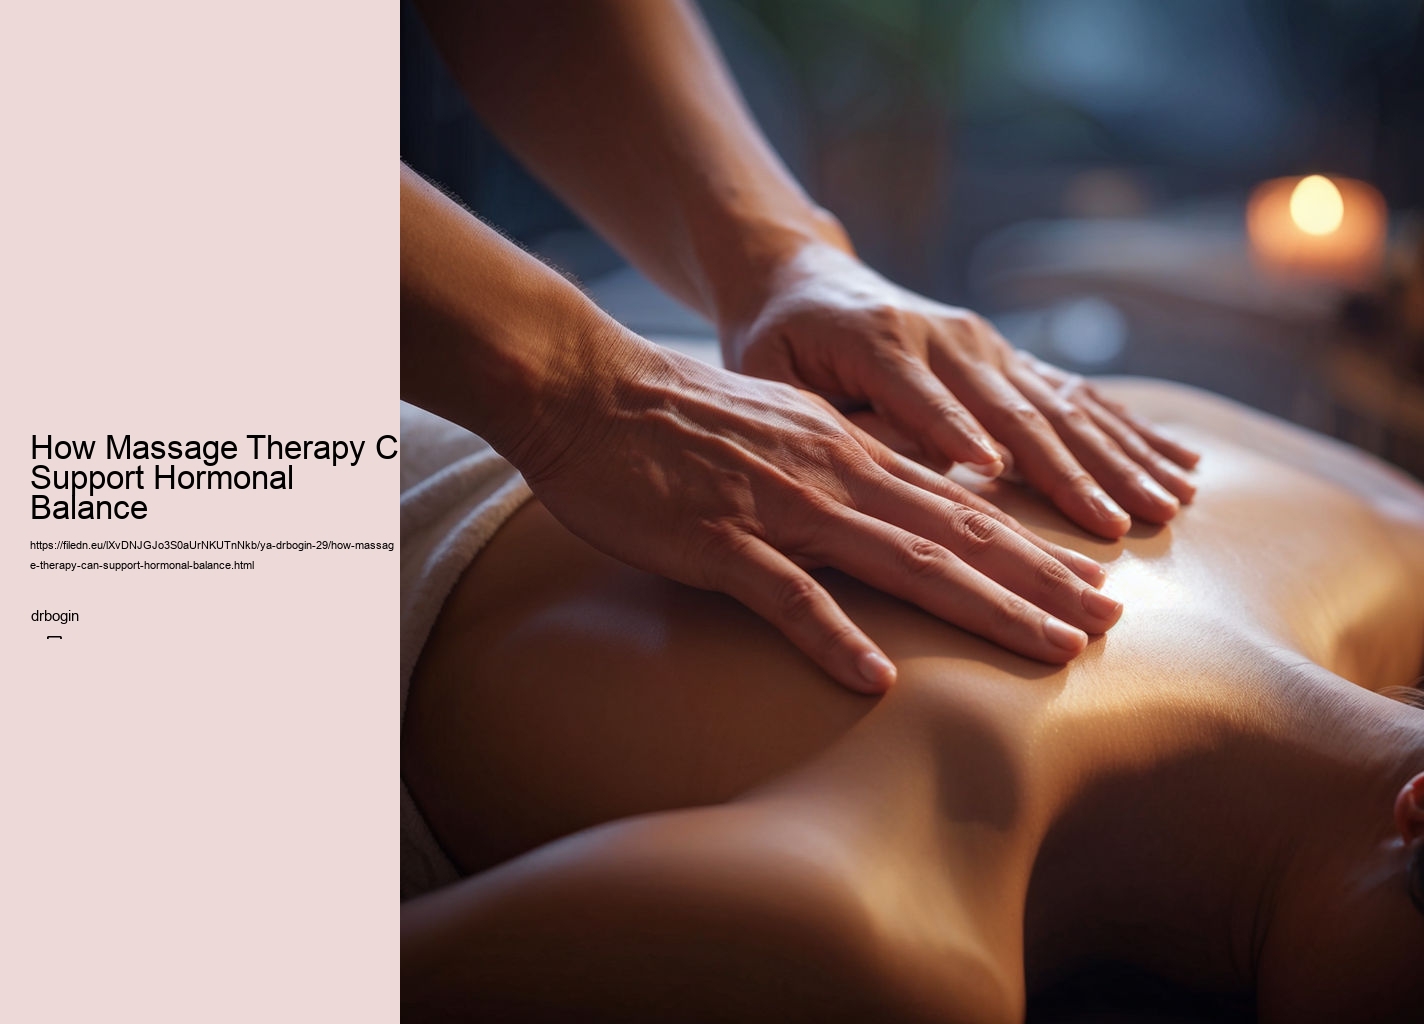 How Massage Therapy Can Support Hormonal Balance